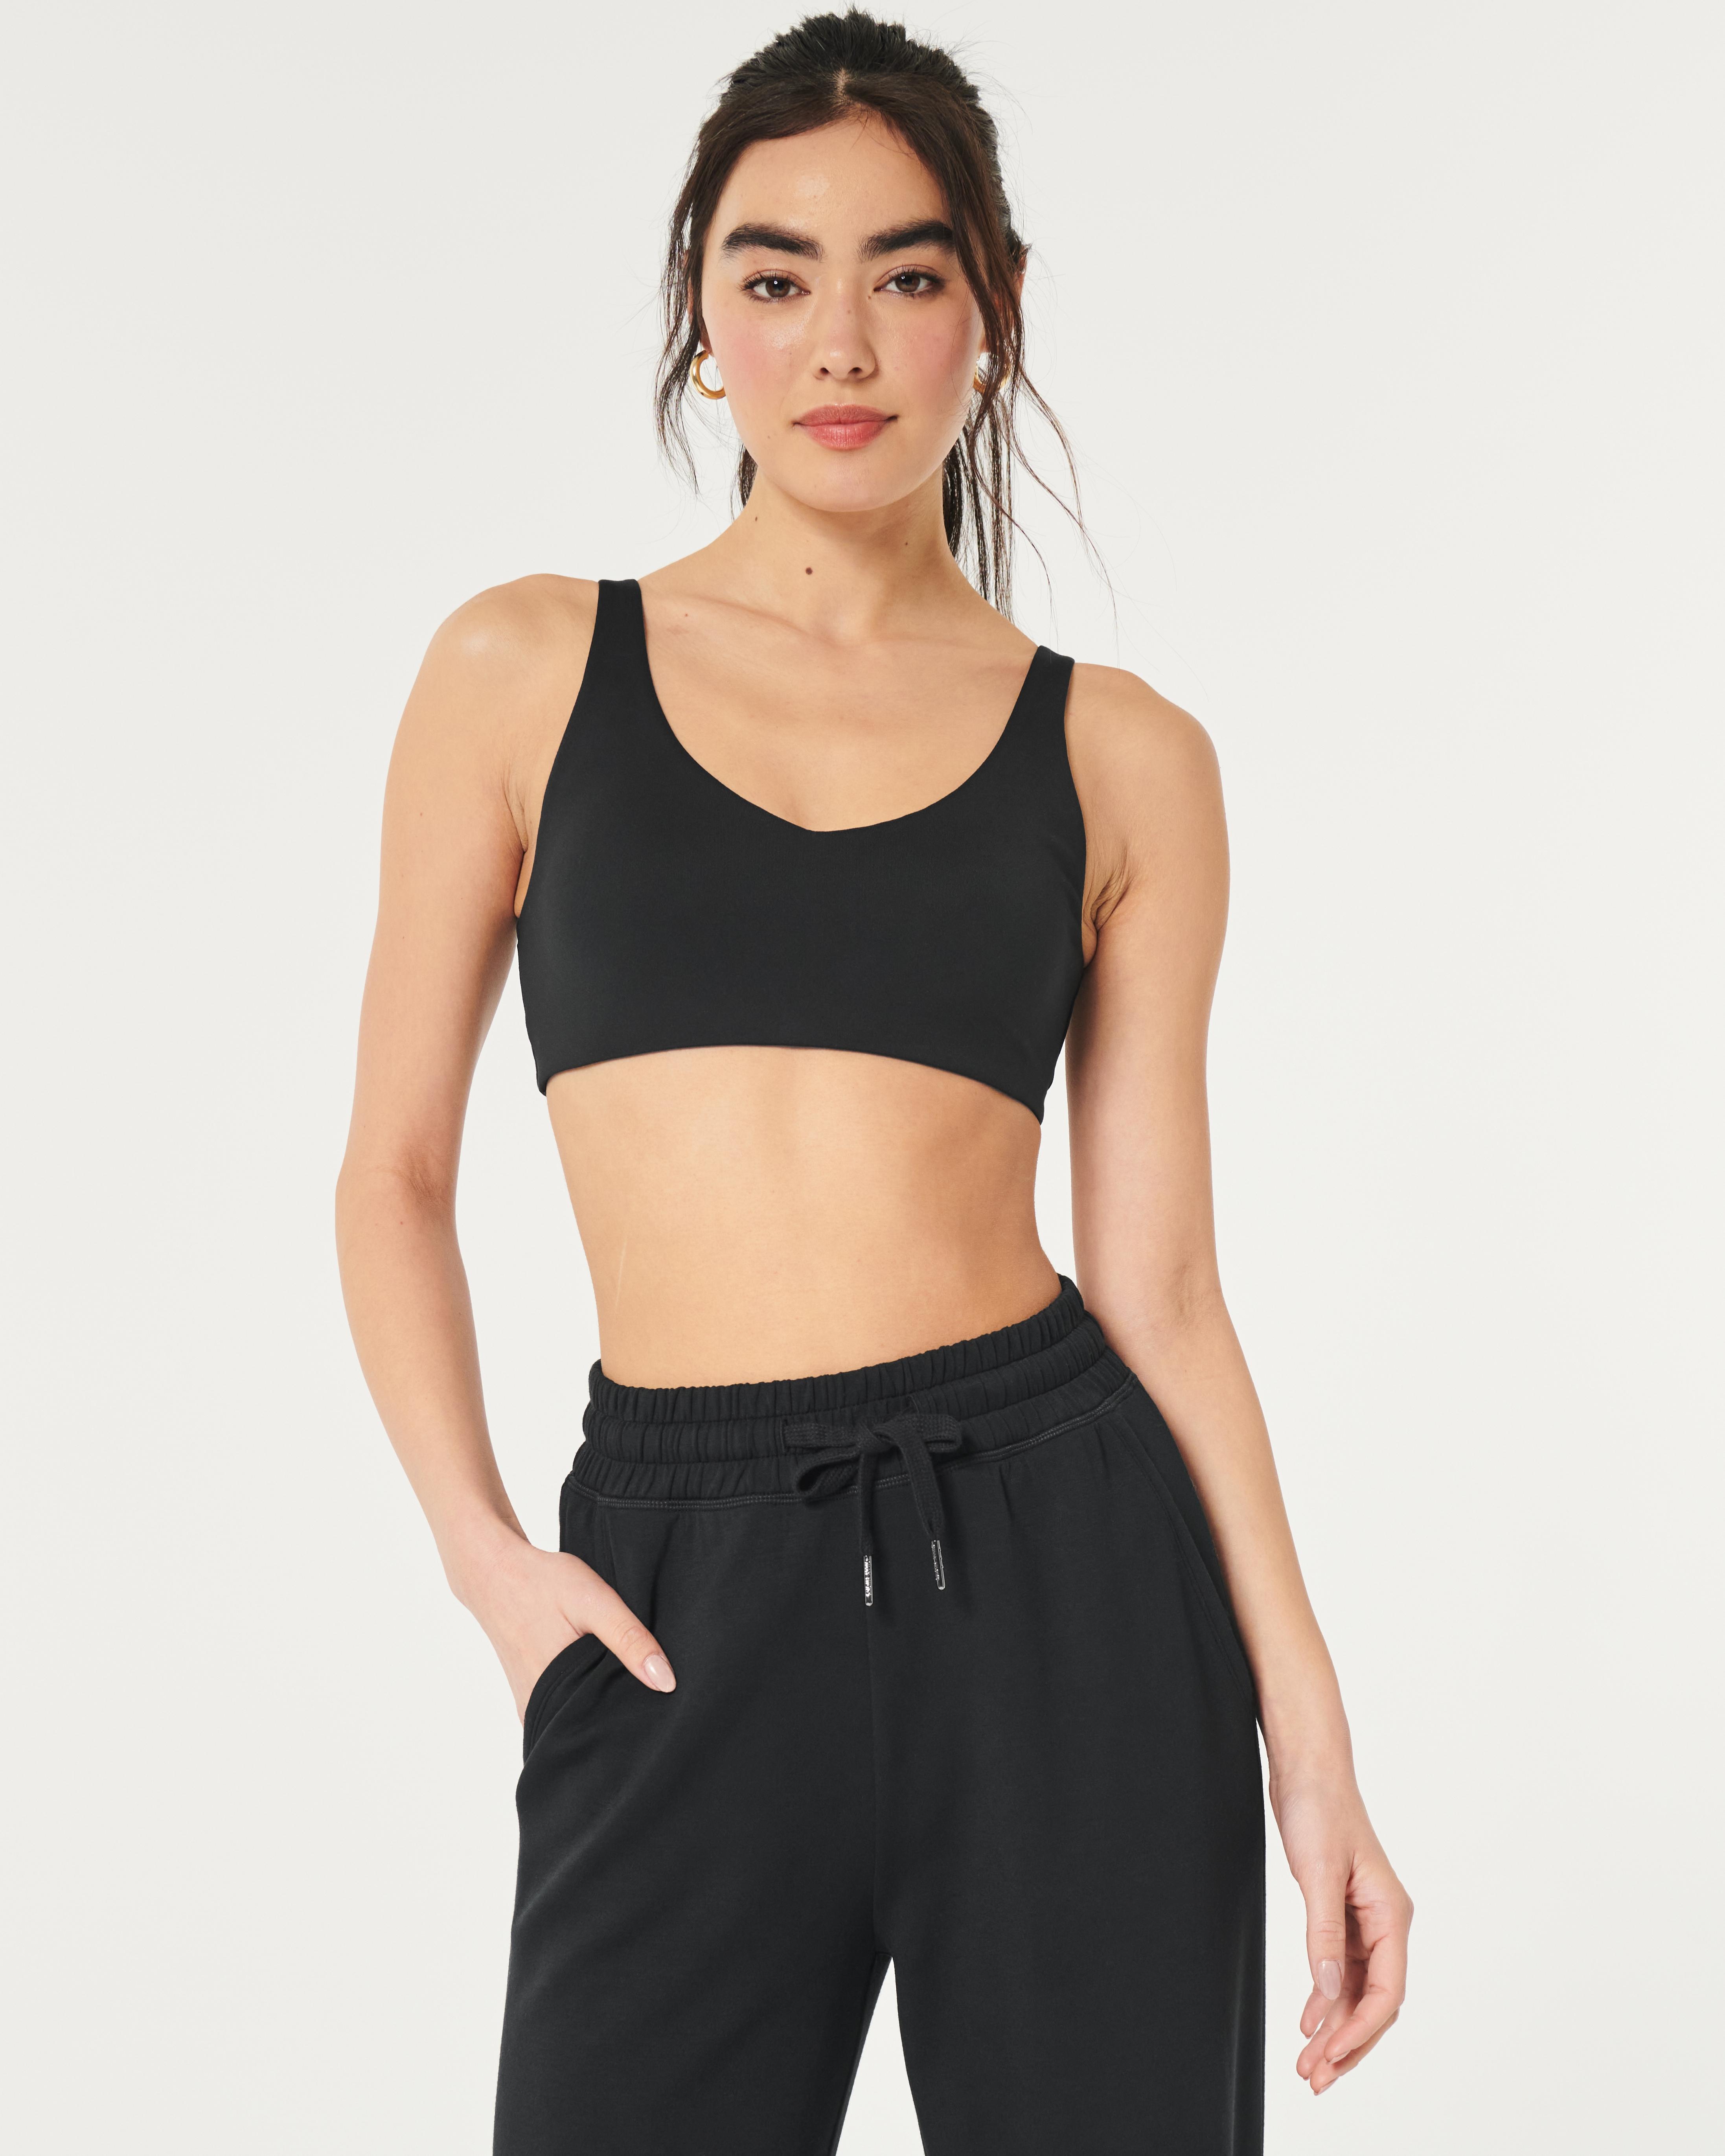 Hollister Gilly Hicks Active Recharge Plunge Sports Bra in Black